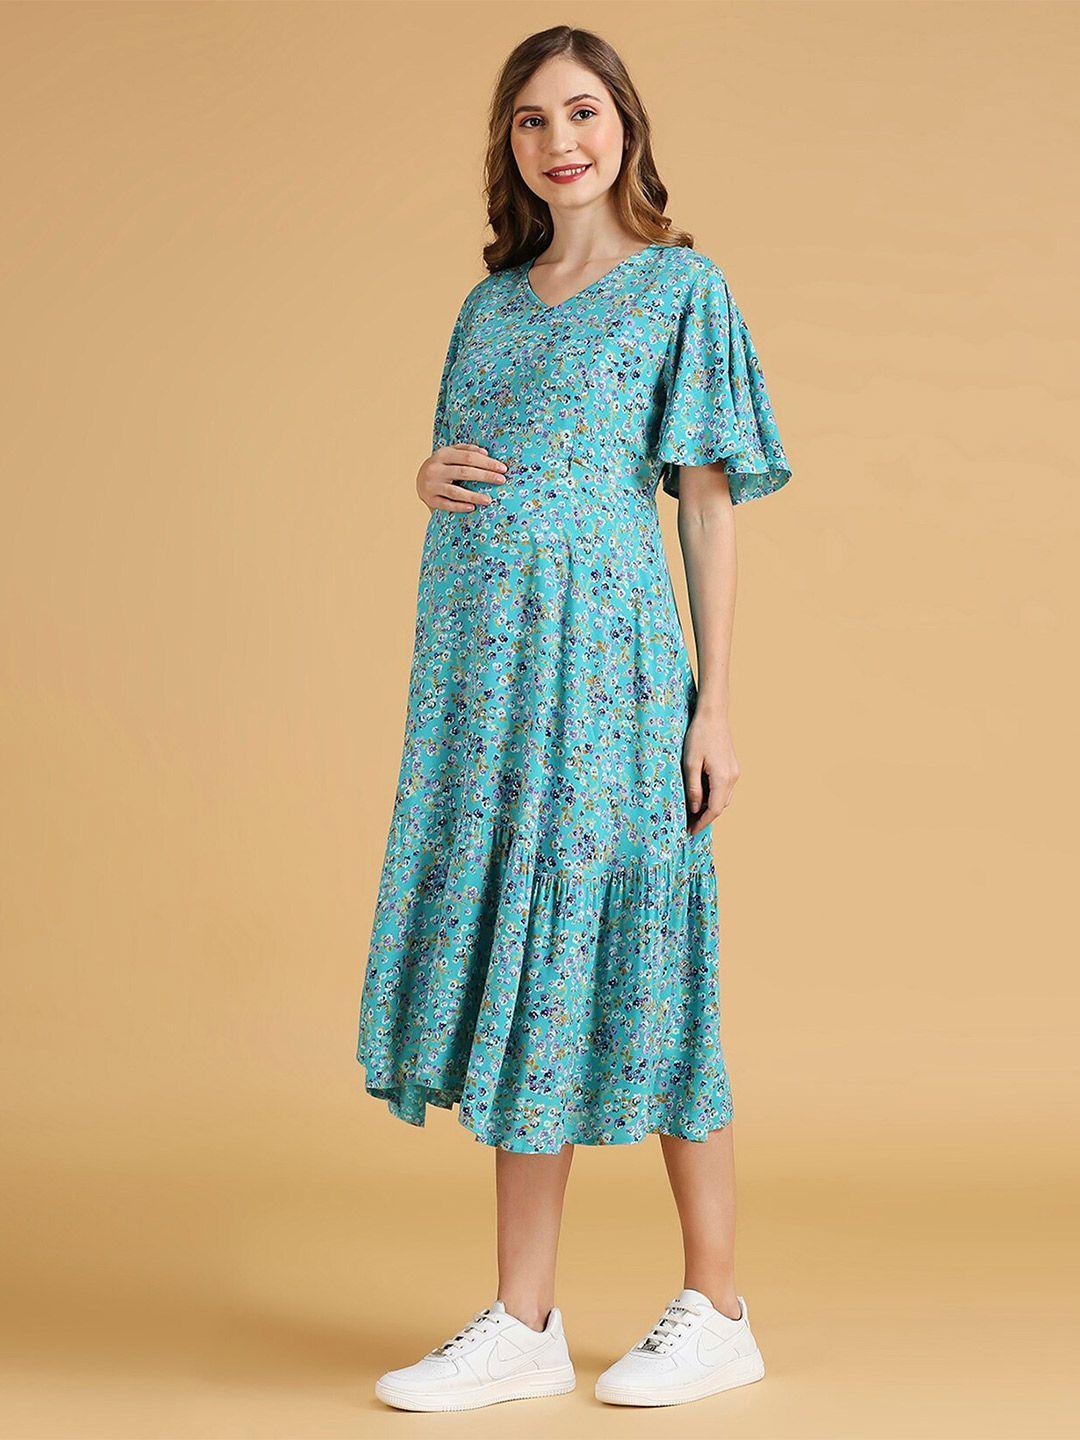 momtobe floral print maternity fit & flare dress